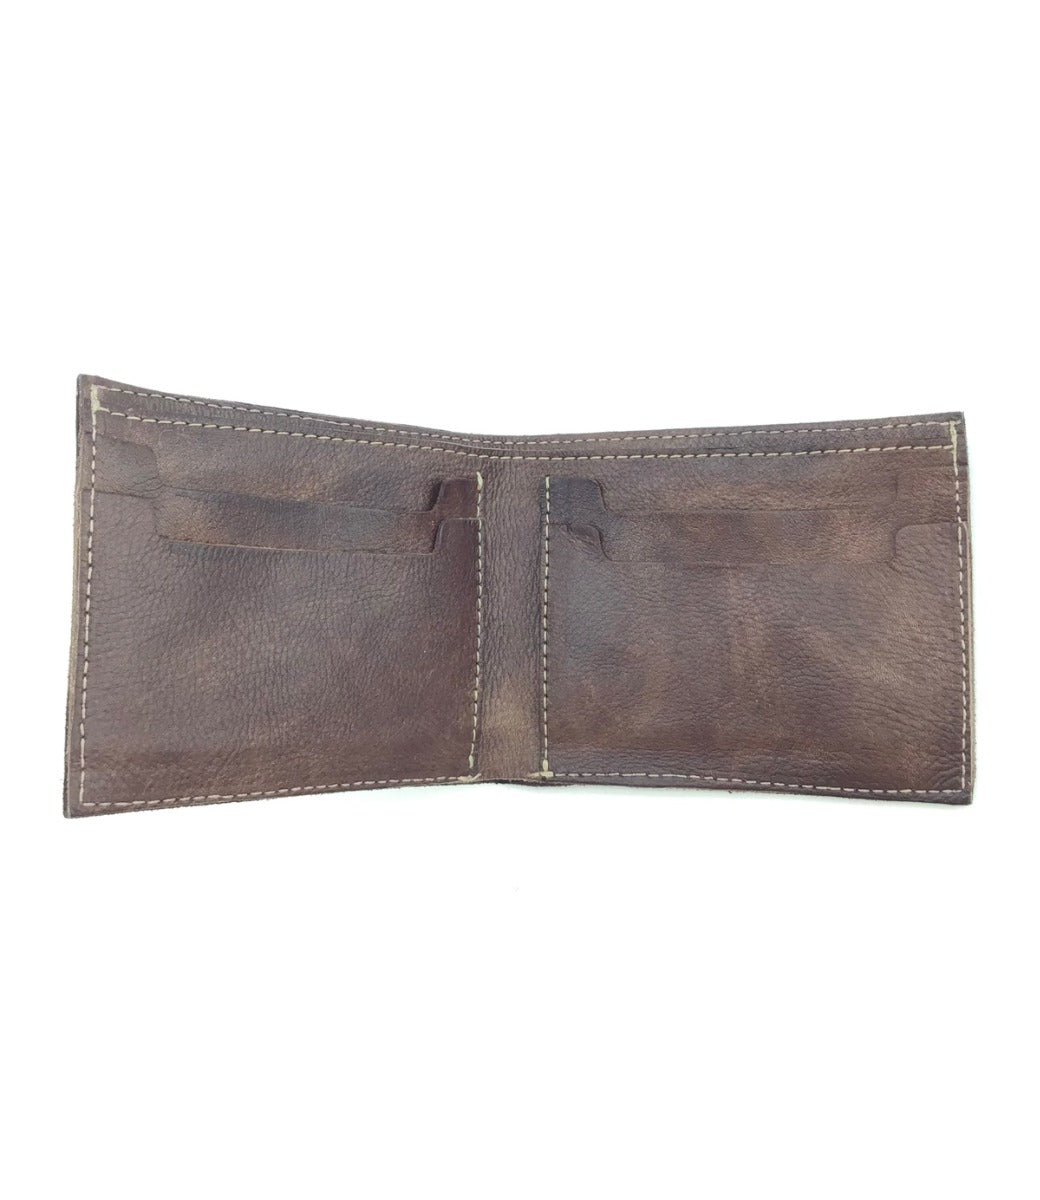 A Bed Stu Amidala brown leather wallet on a white background.